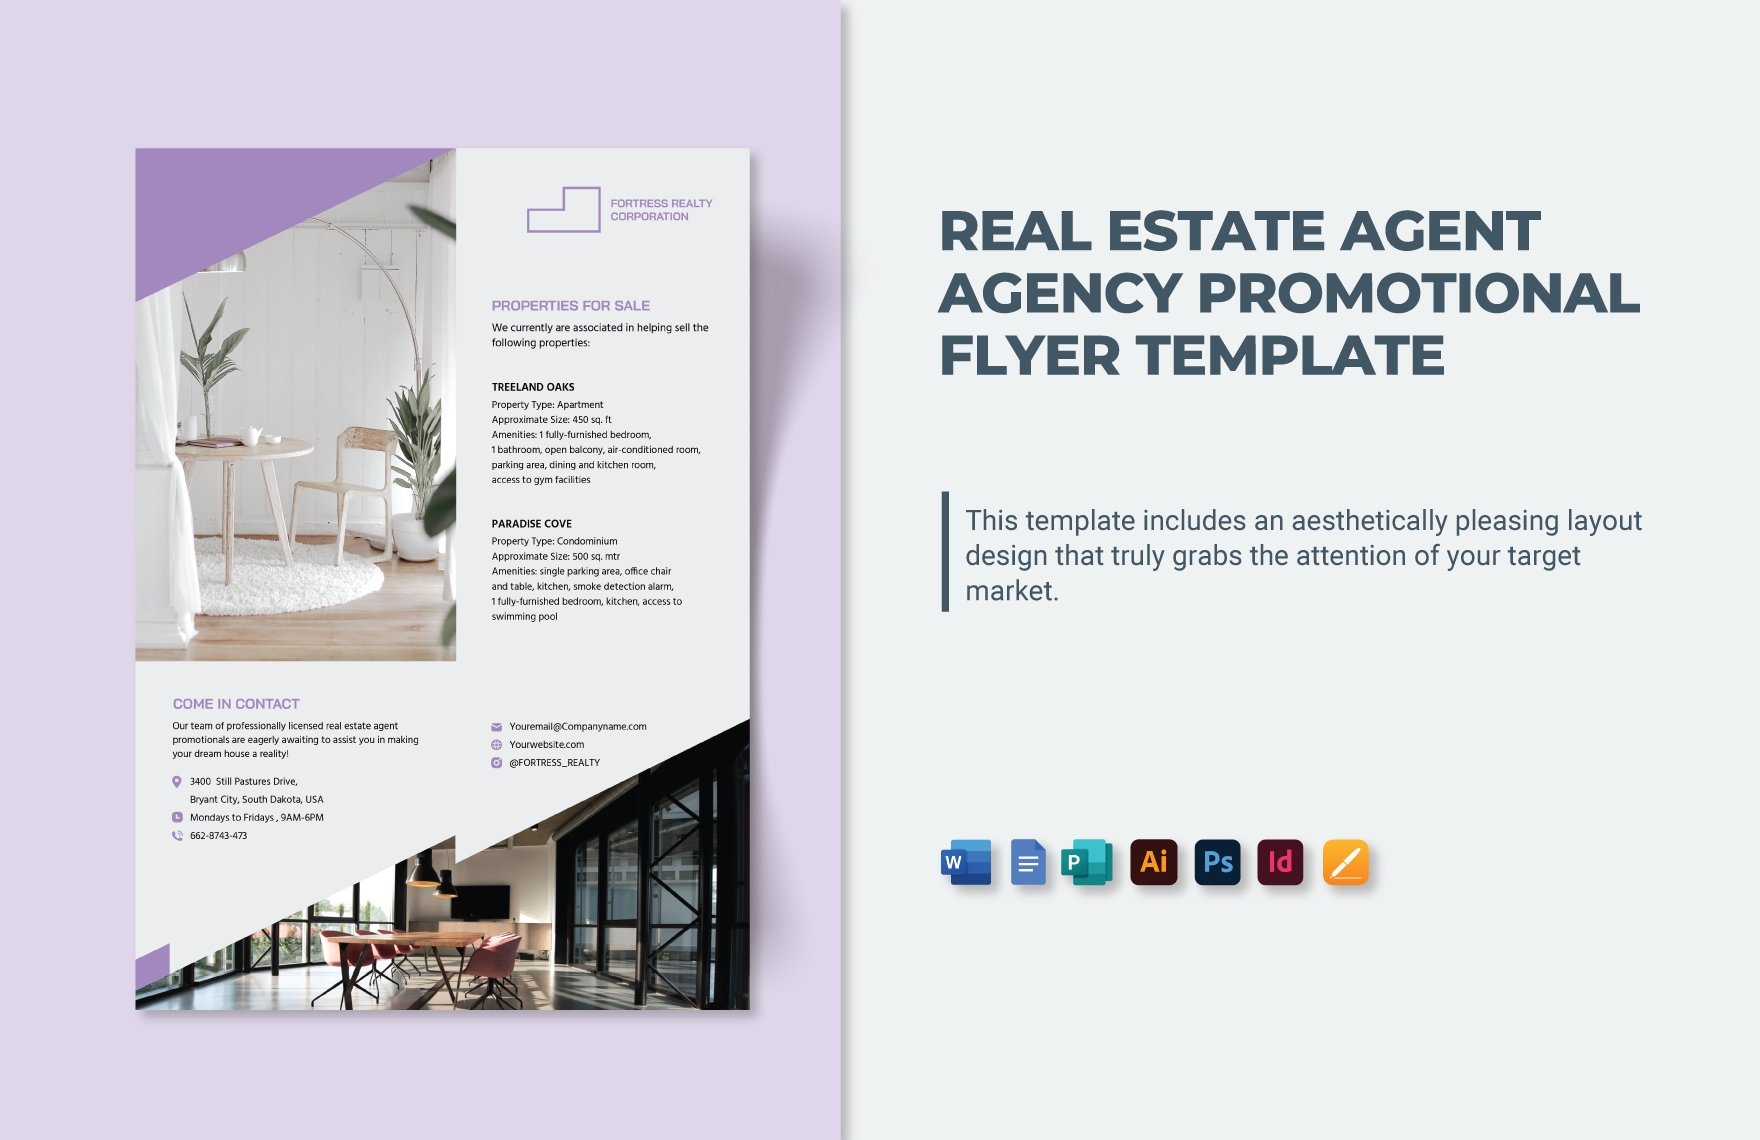 Real Estate Agent Agency Promotional Flyer Template